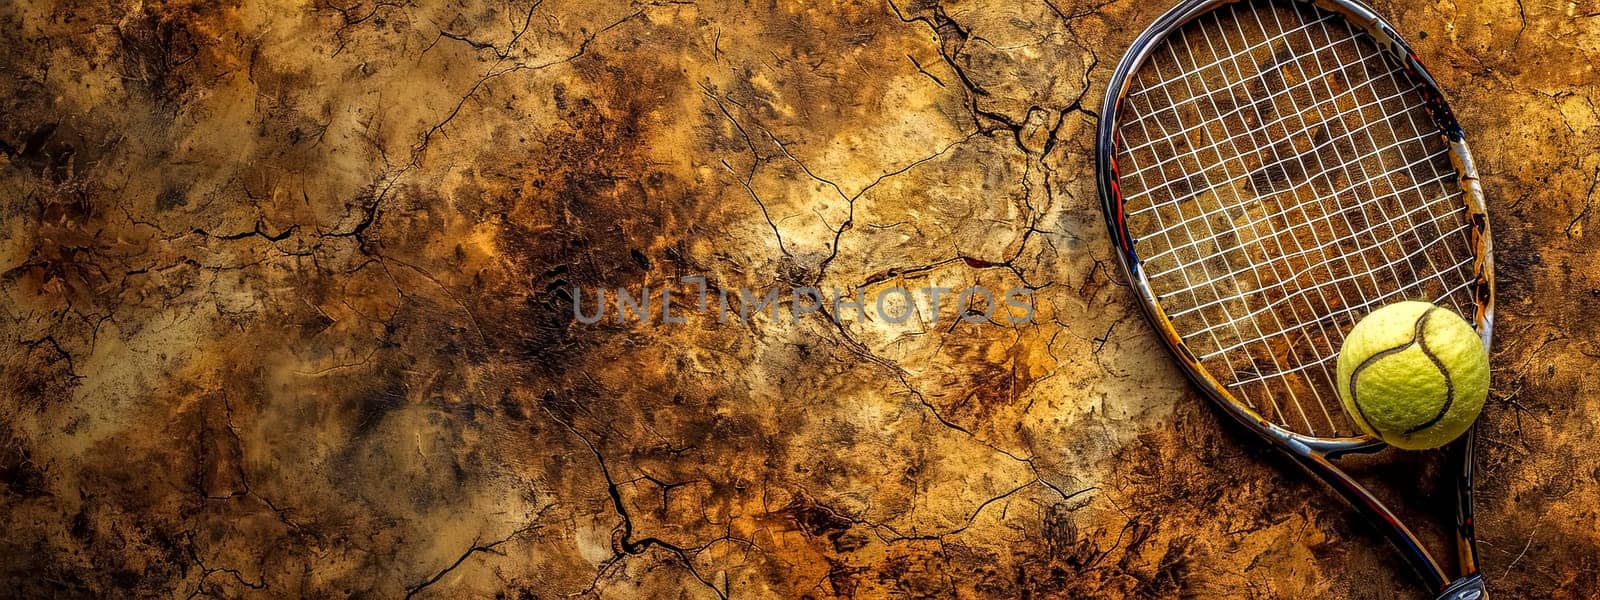 A tennis racket and ball against a cracked, rustic earth-toned background. by Edophoto